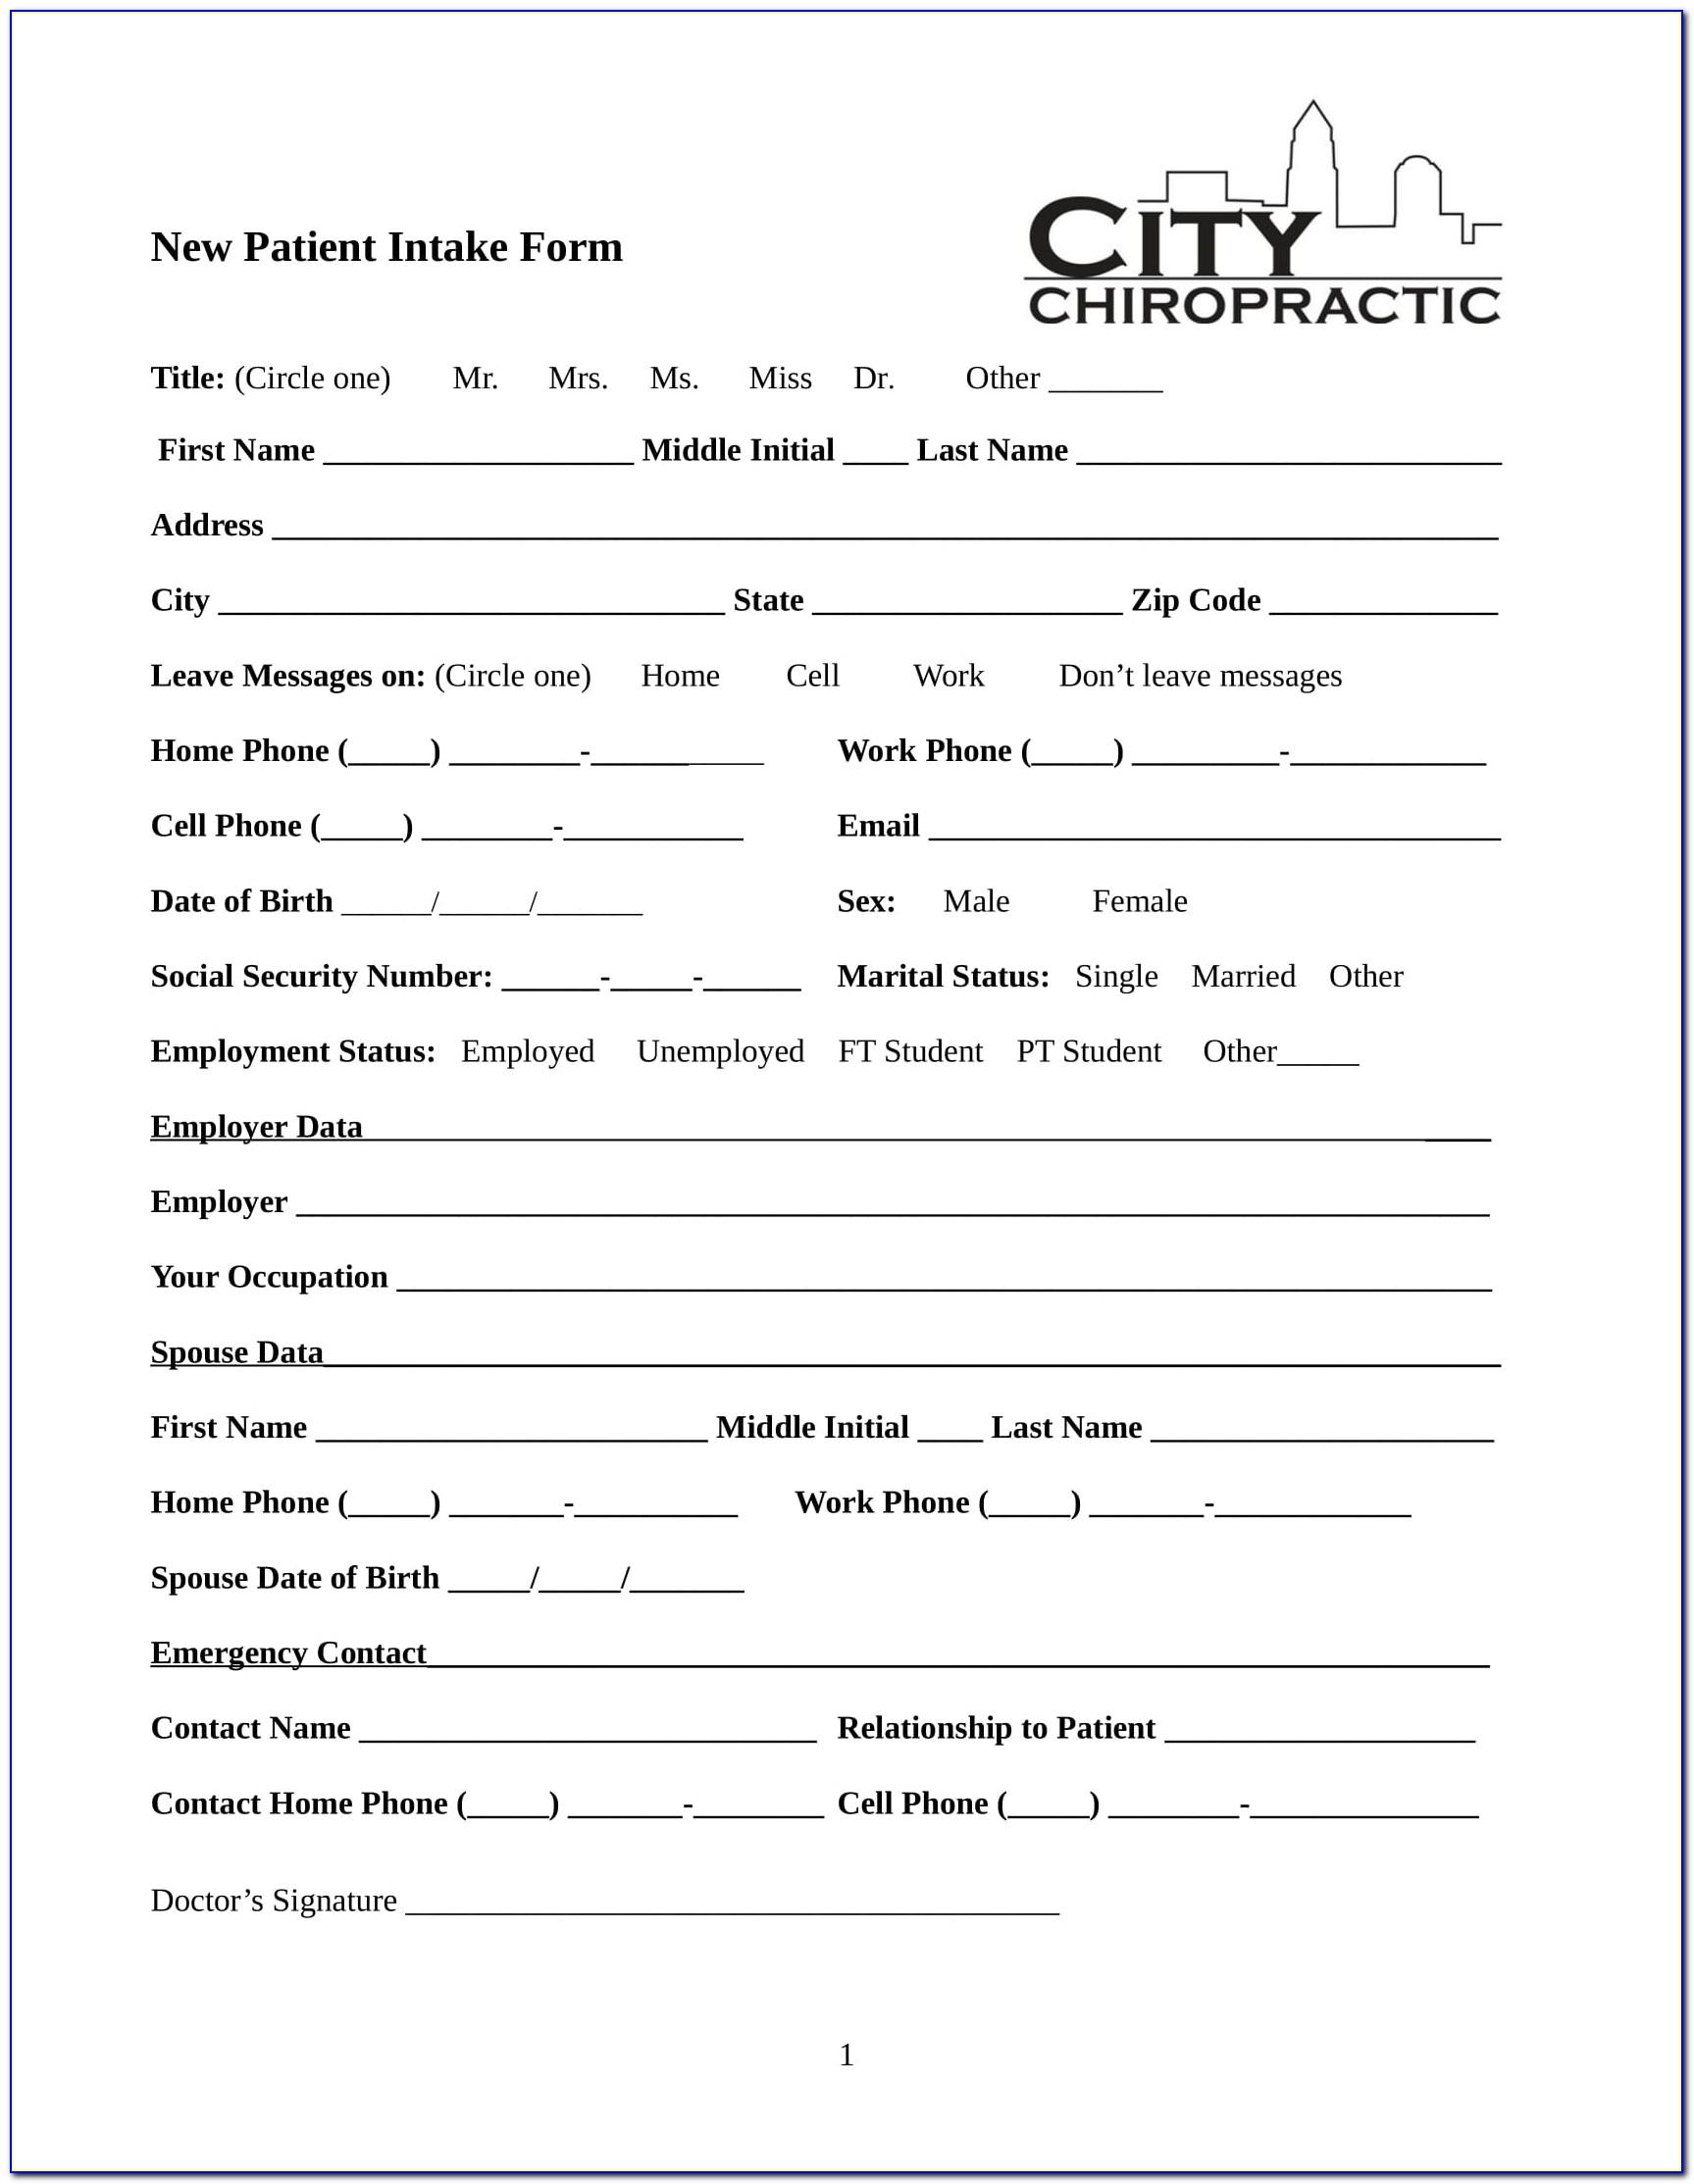 Chiropractic New Patient Intake Forms